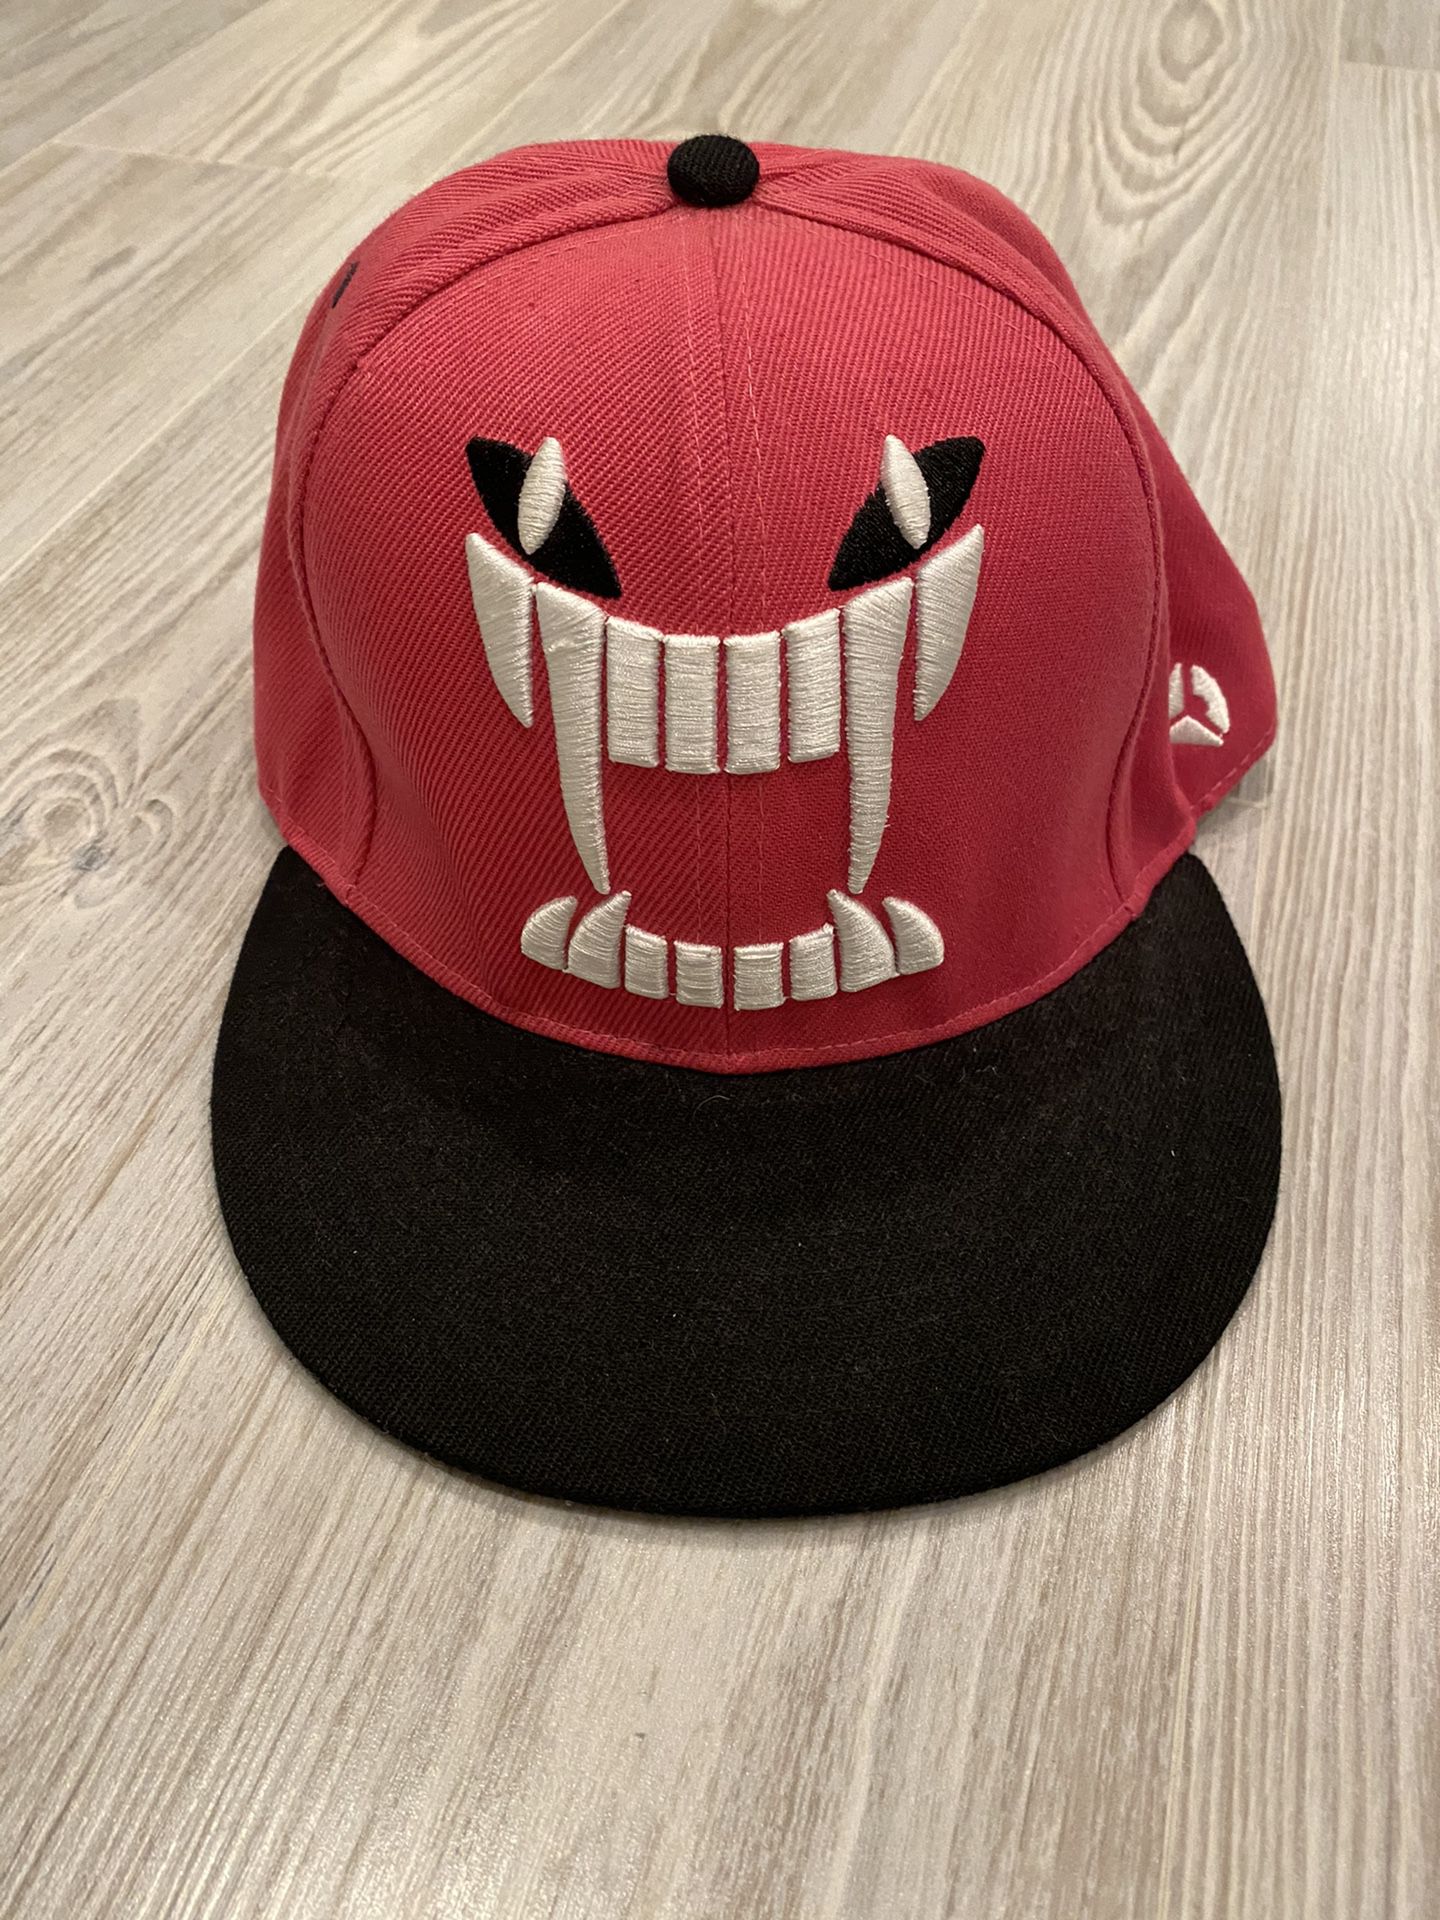 Pink angry face snapback hat cap